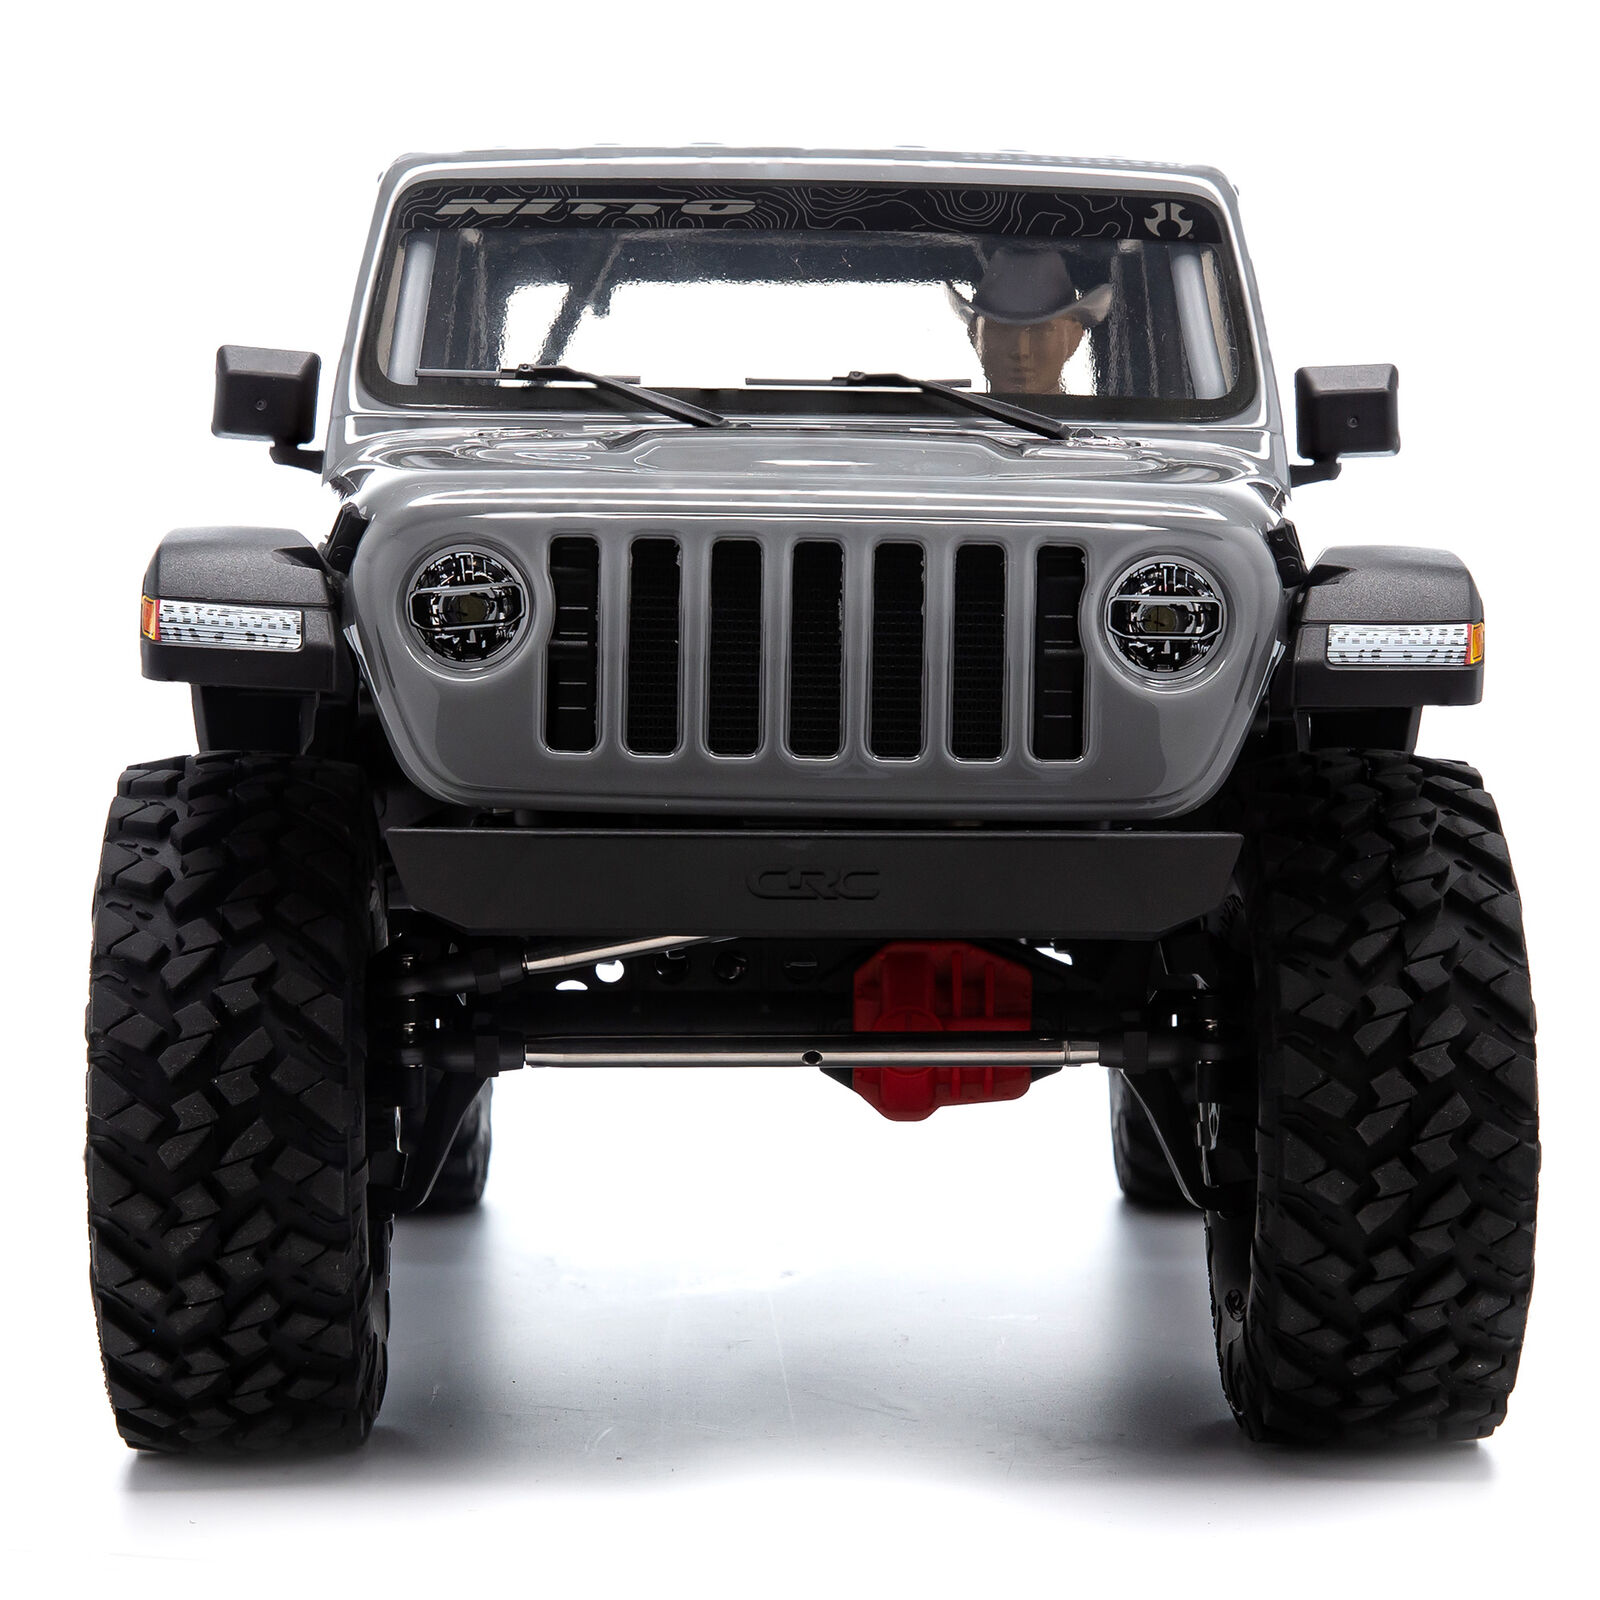 Details about  / For Axial SCX10 III NEWWrangler TRX4 TRX6 Car 1:10 Spotlights Lamp Simulation